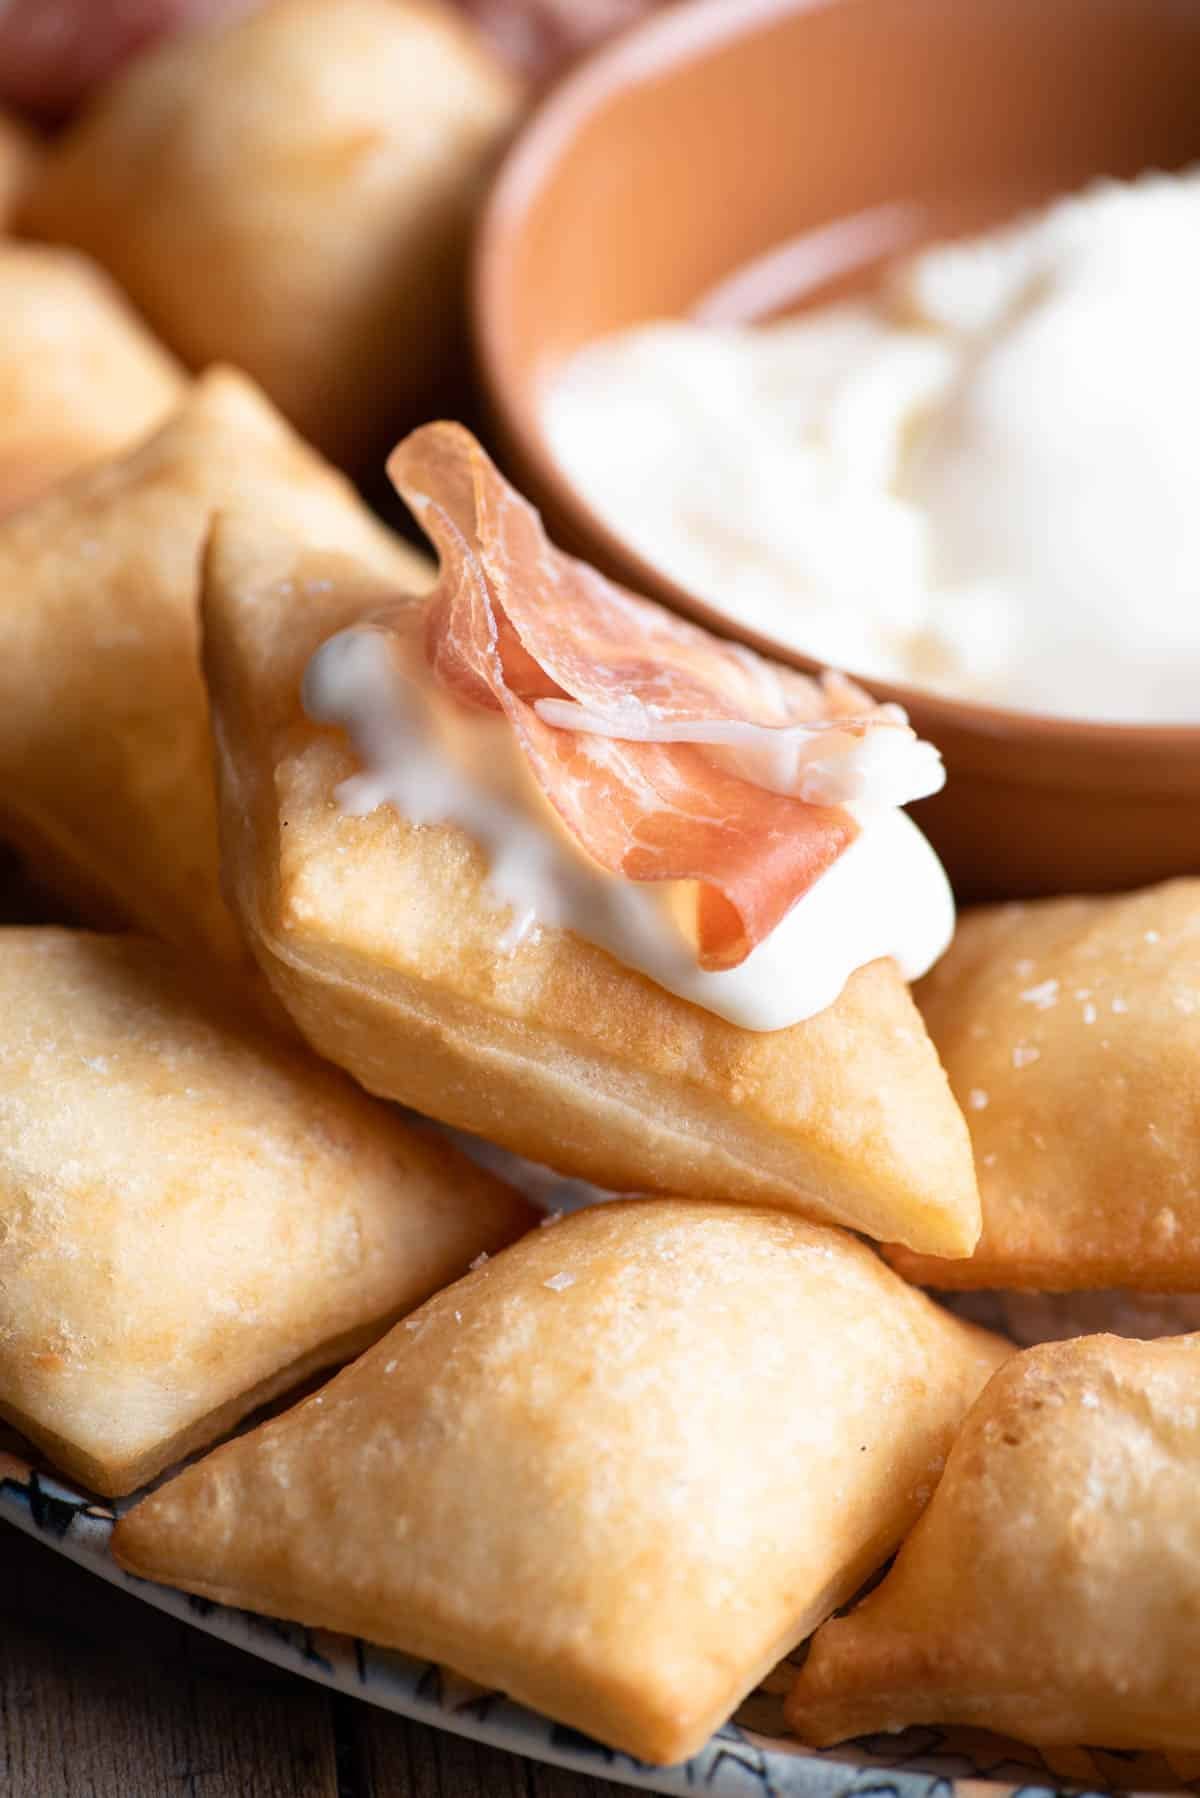 A close up of Gnocco Fritto (Italian fried dough) with cheese and prosciutto on top.